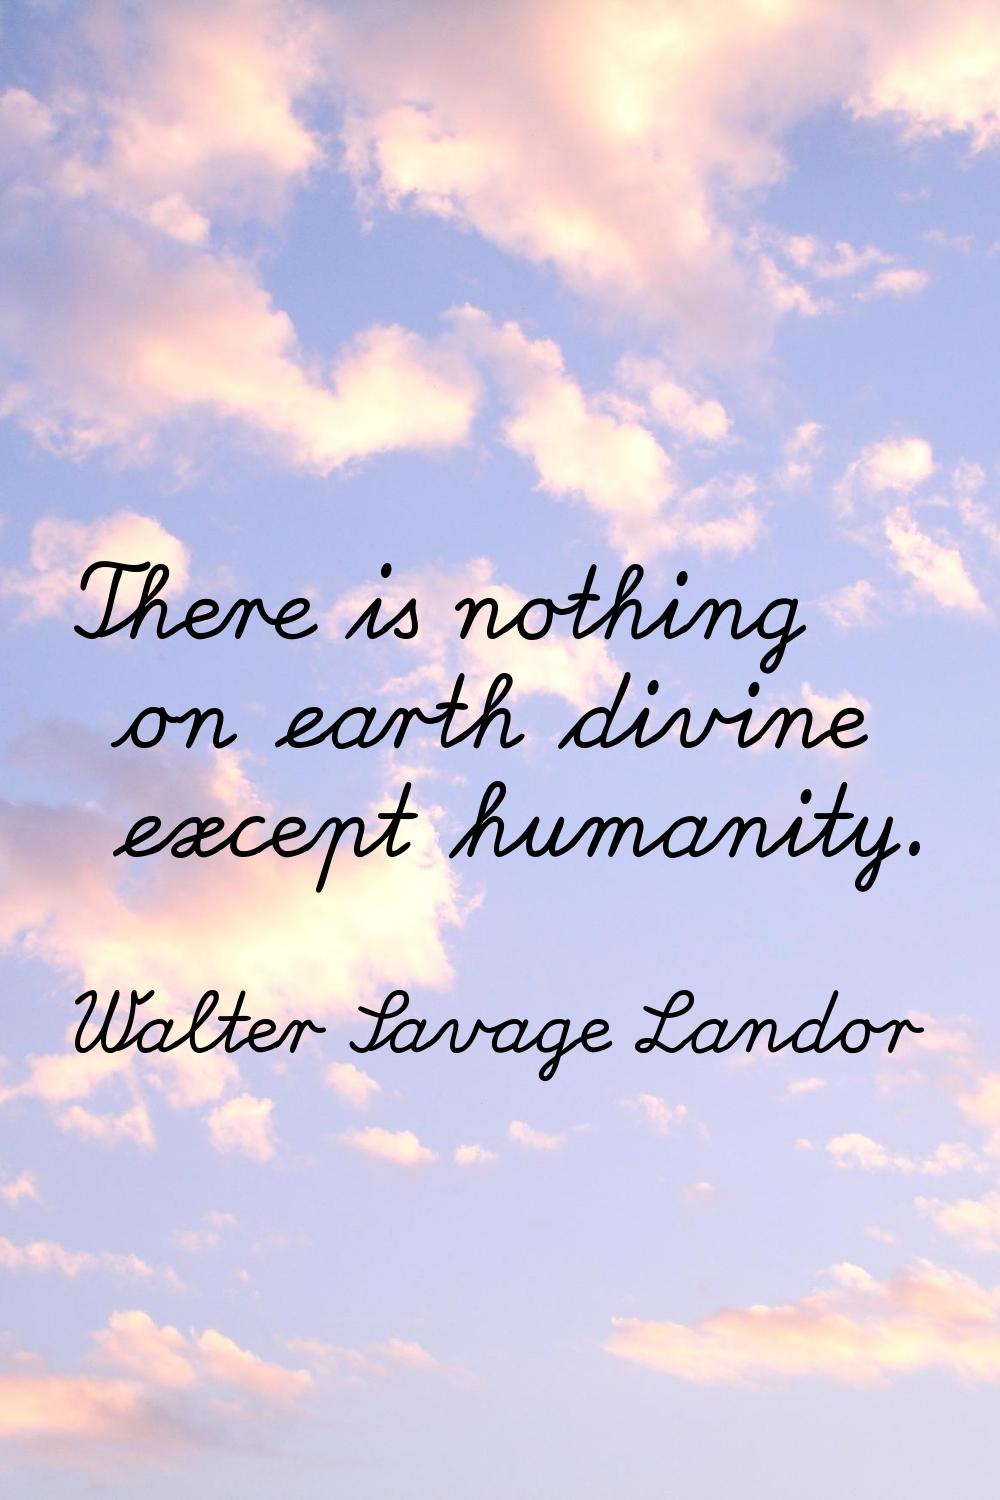 There is nothing on earth divine except humanity.